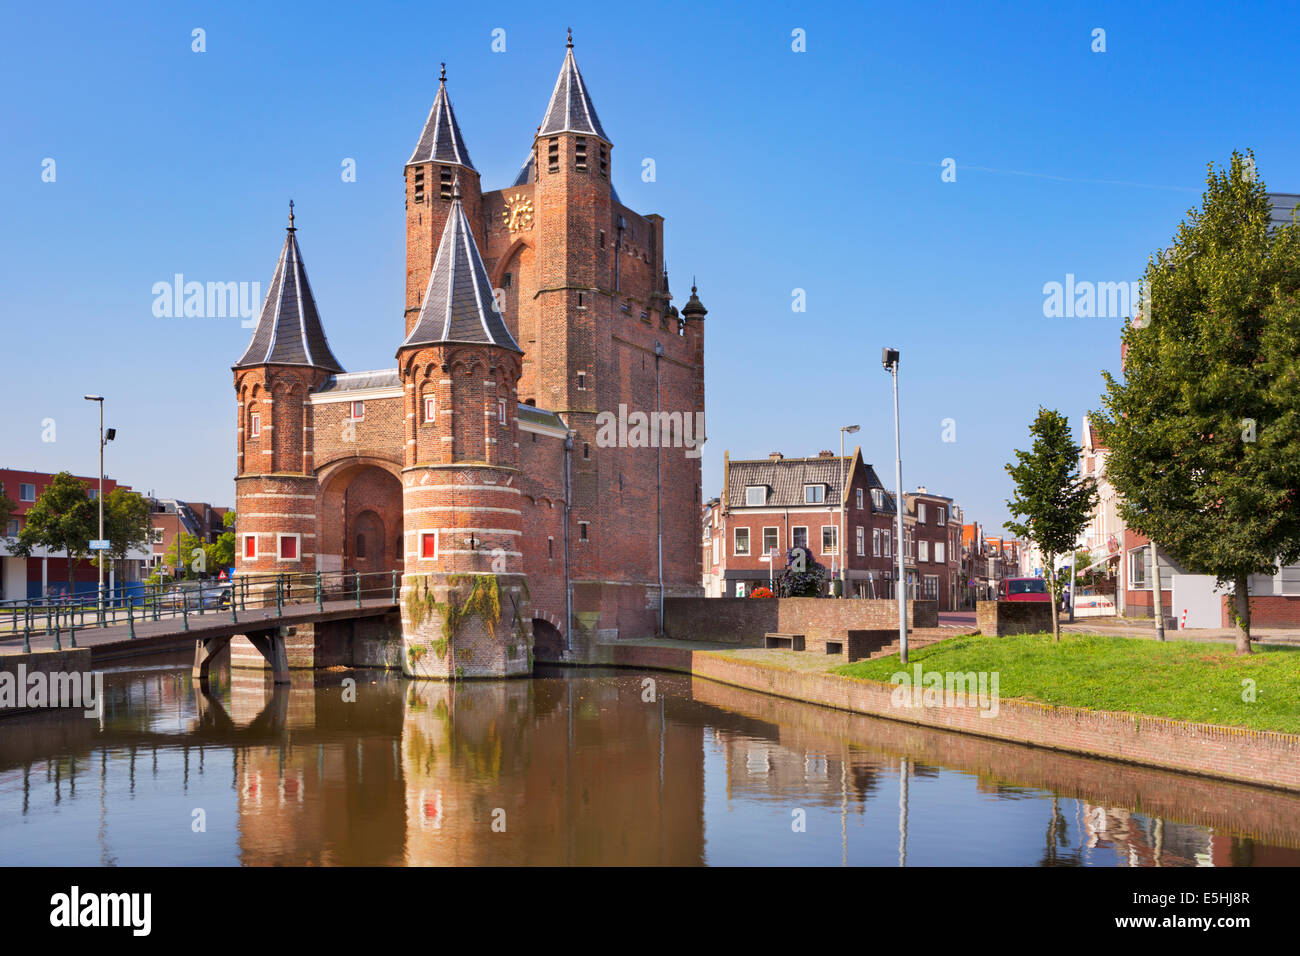 The Amsterdamse Poort city gate in Haarlem, The Netherlands Stock Photo